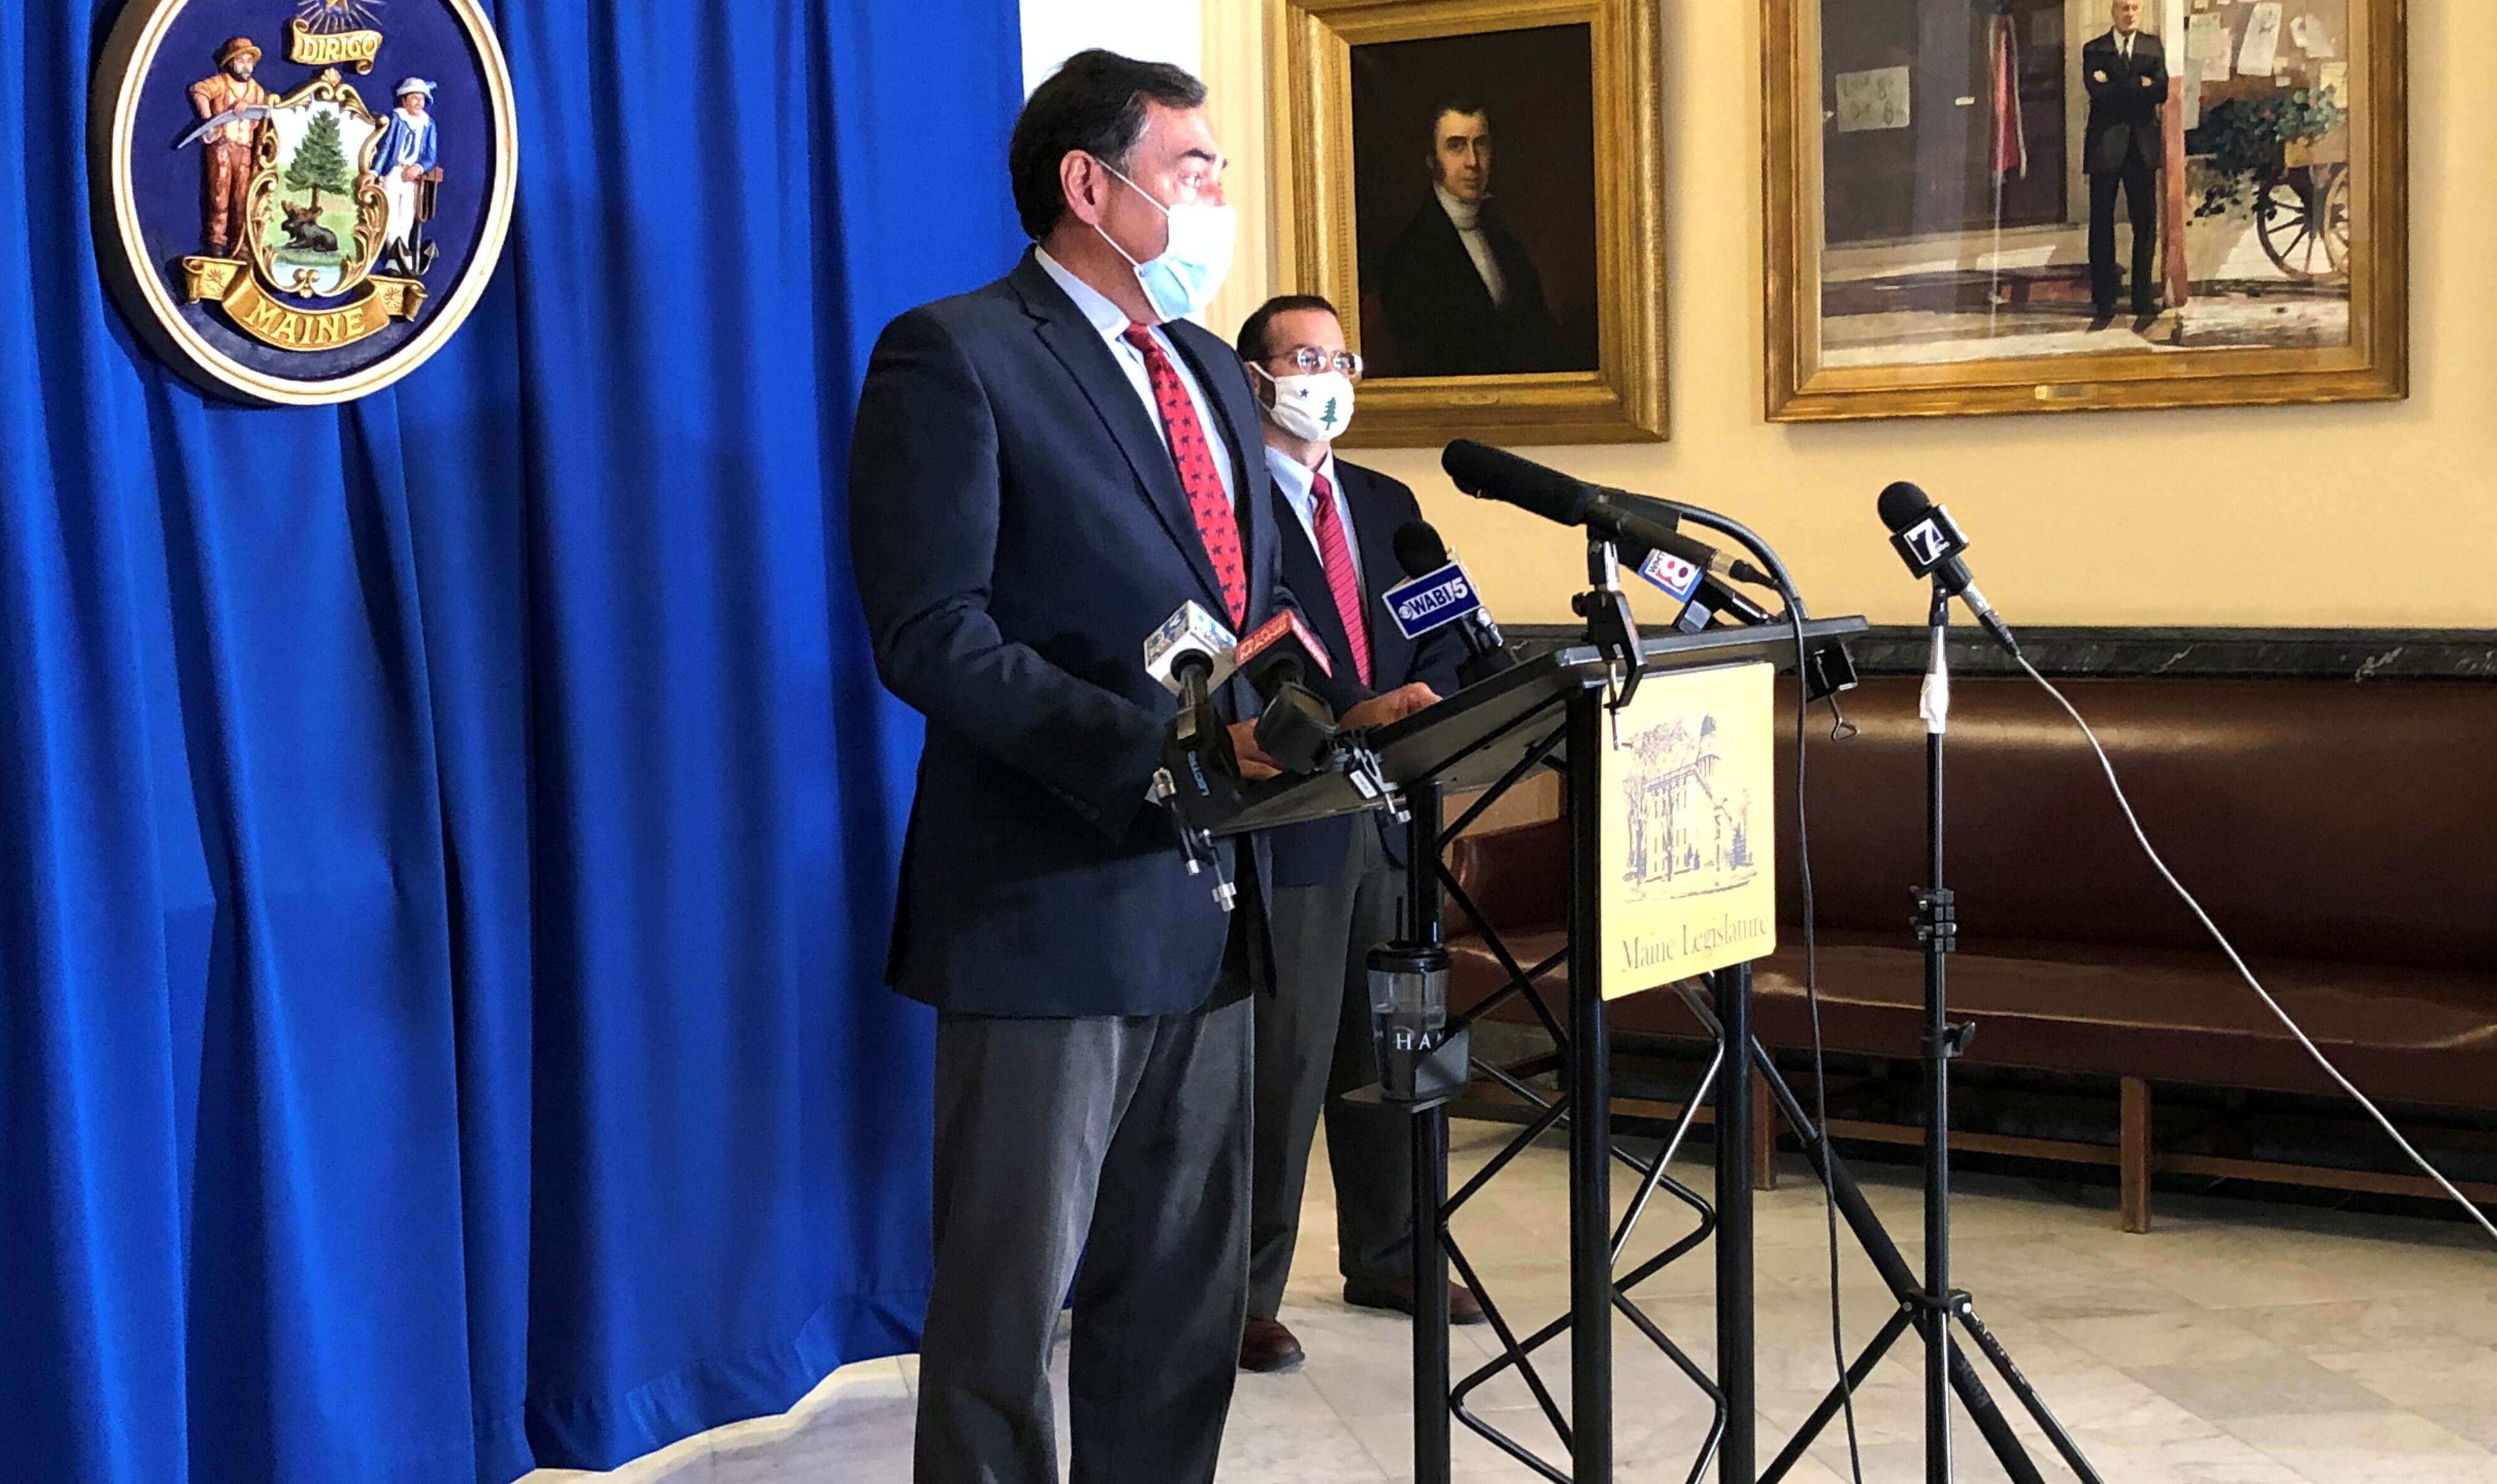 A man, white, wearing a face covering and in a suit, stands at a lecturn with microphones on it as another man stands in the background. there is a blue backdrop behind them with the seal of the state of maine on it, and portions of painted portraits can be seen on the walls.